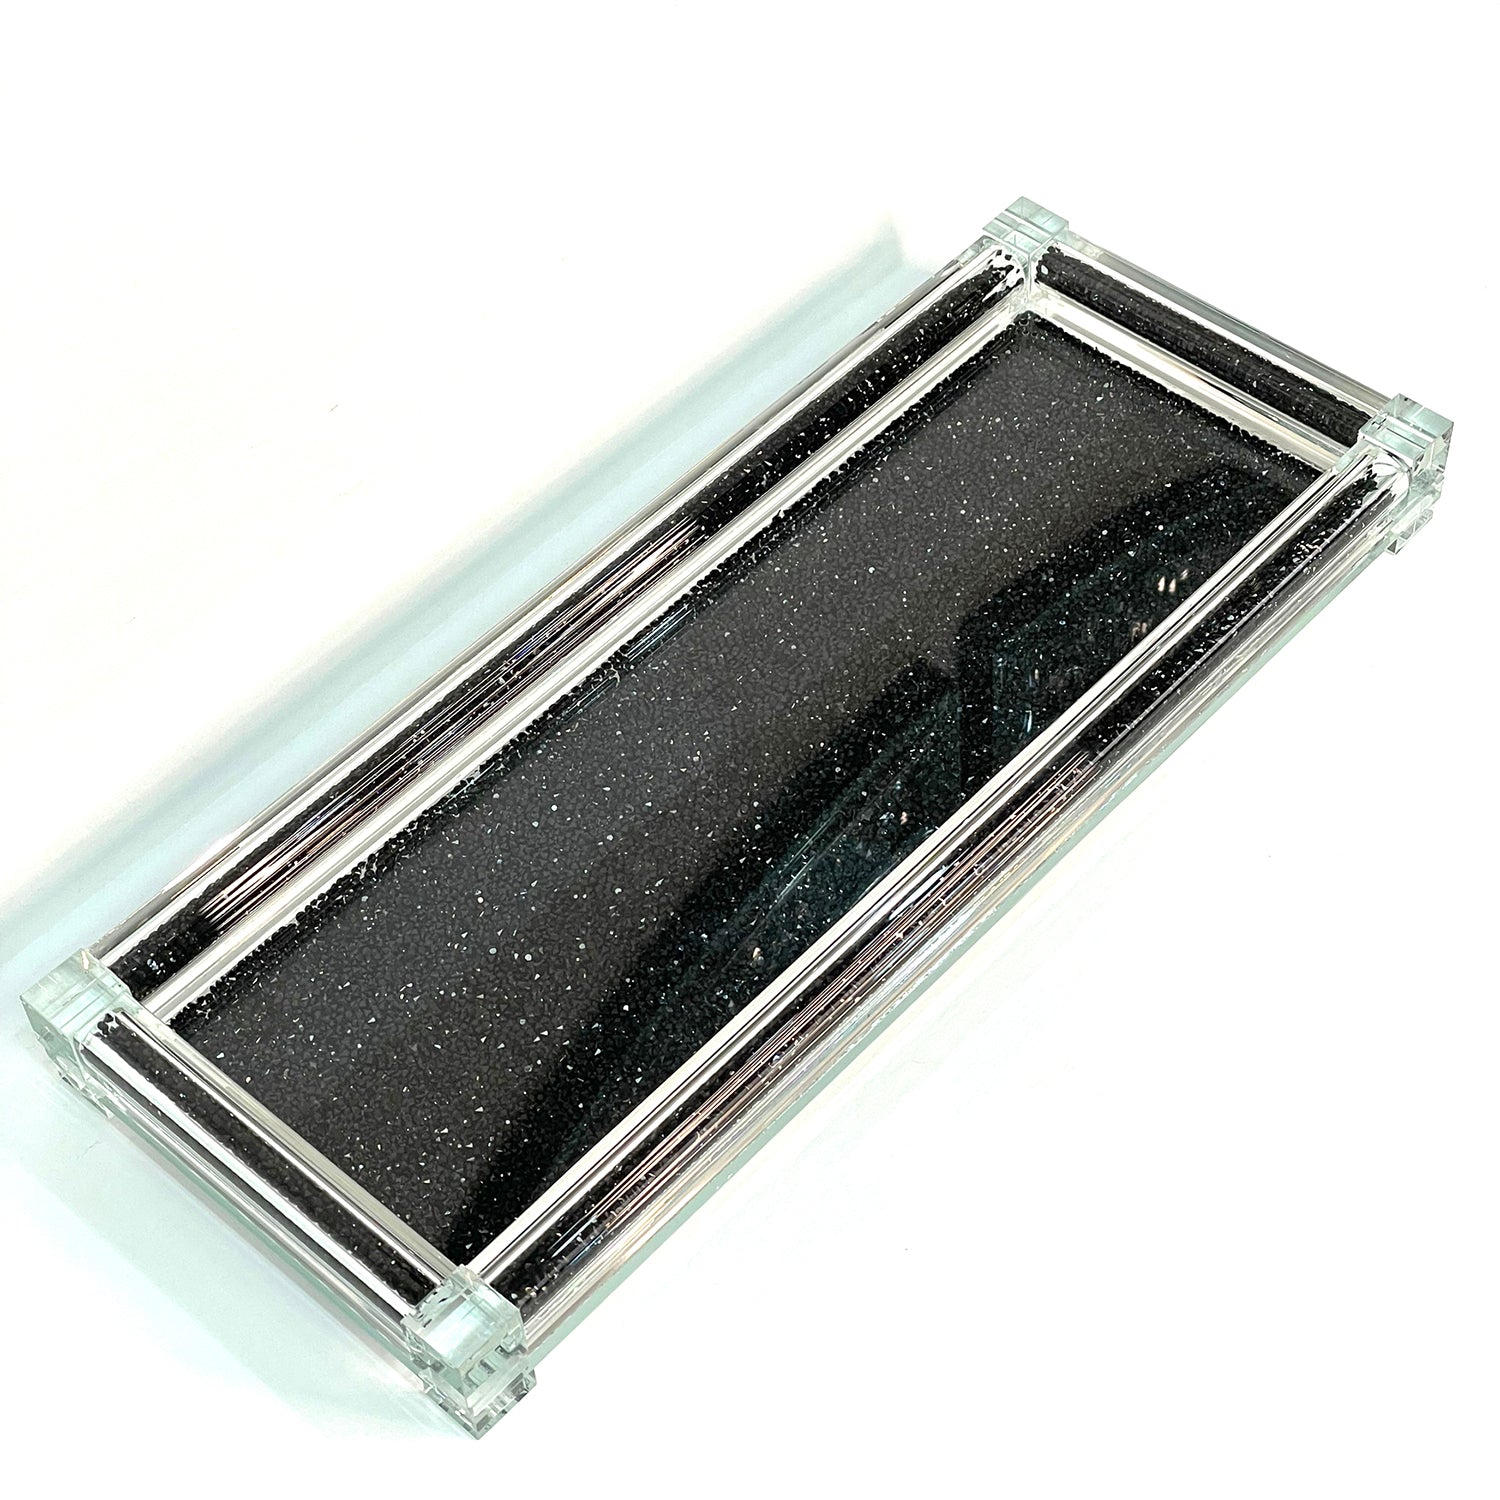 Ambrose Exquisite Large Glass Tray in Gift Box black-glass